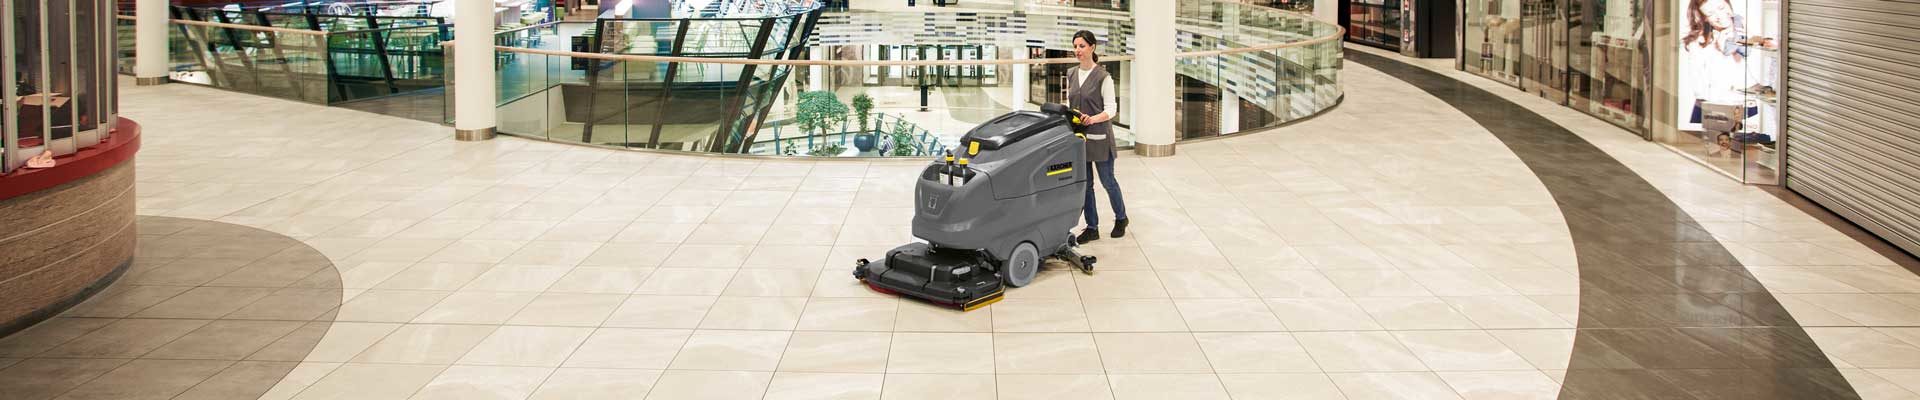 Floor scrubber in shopping mall